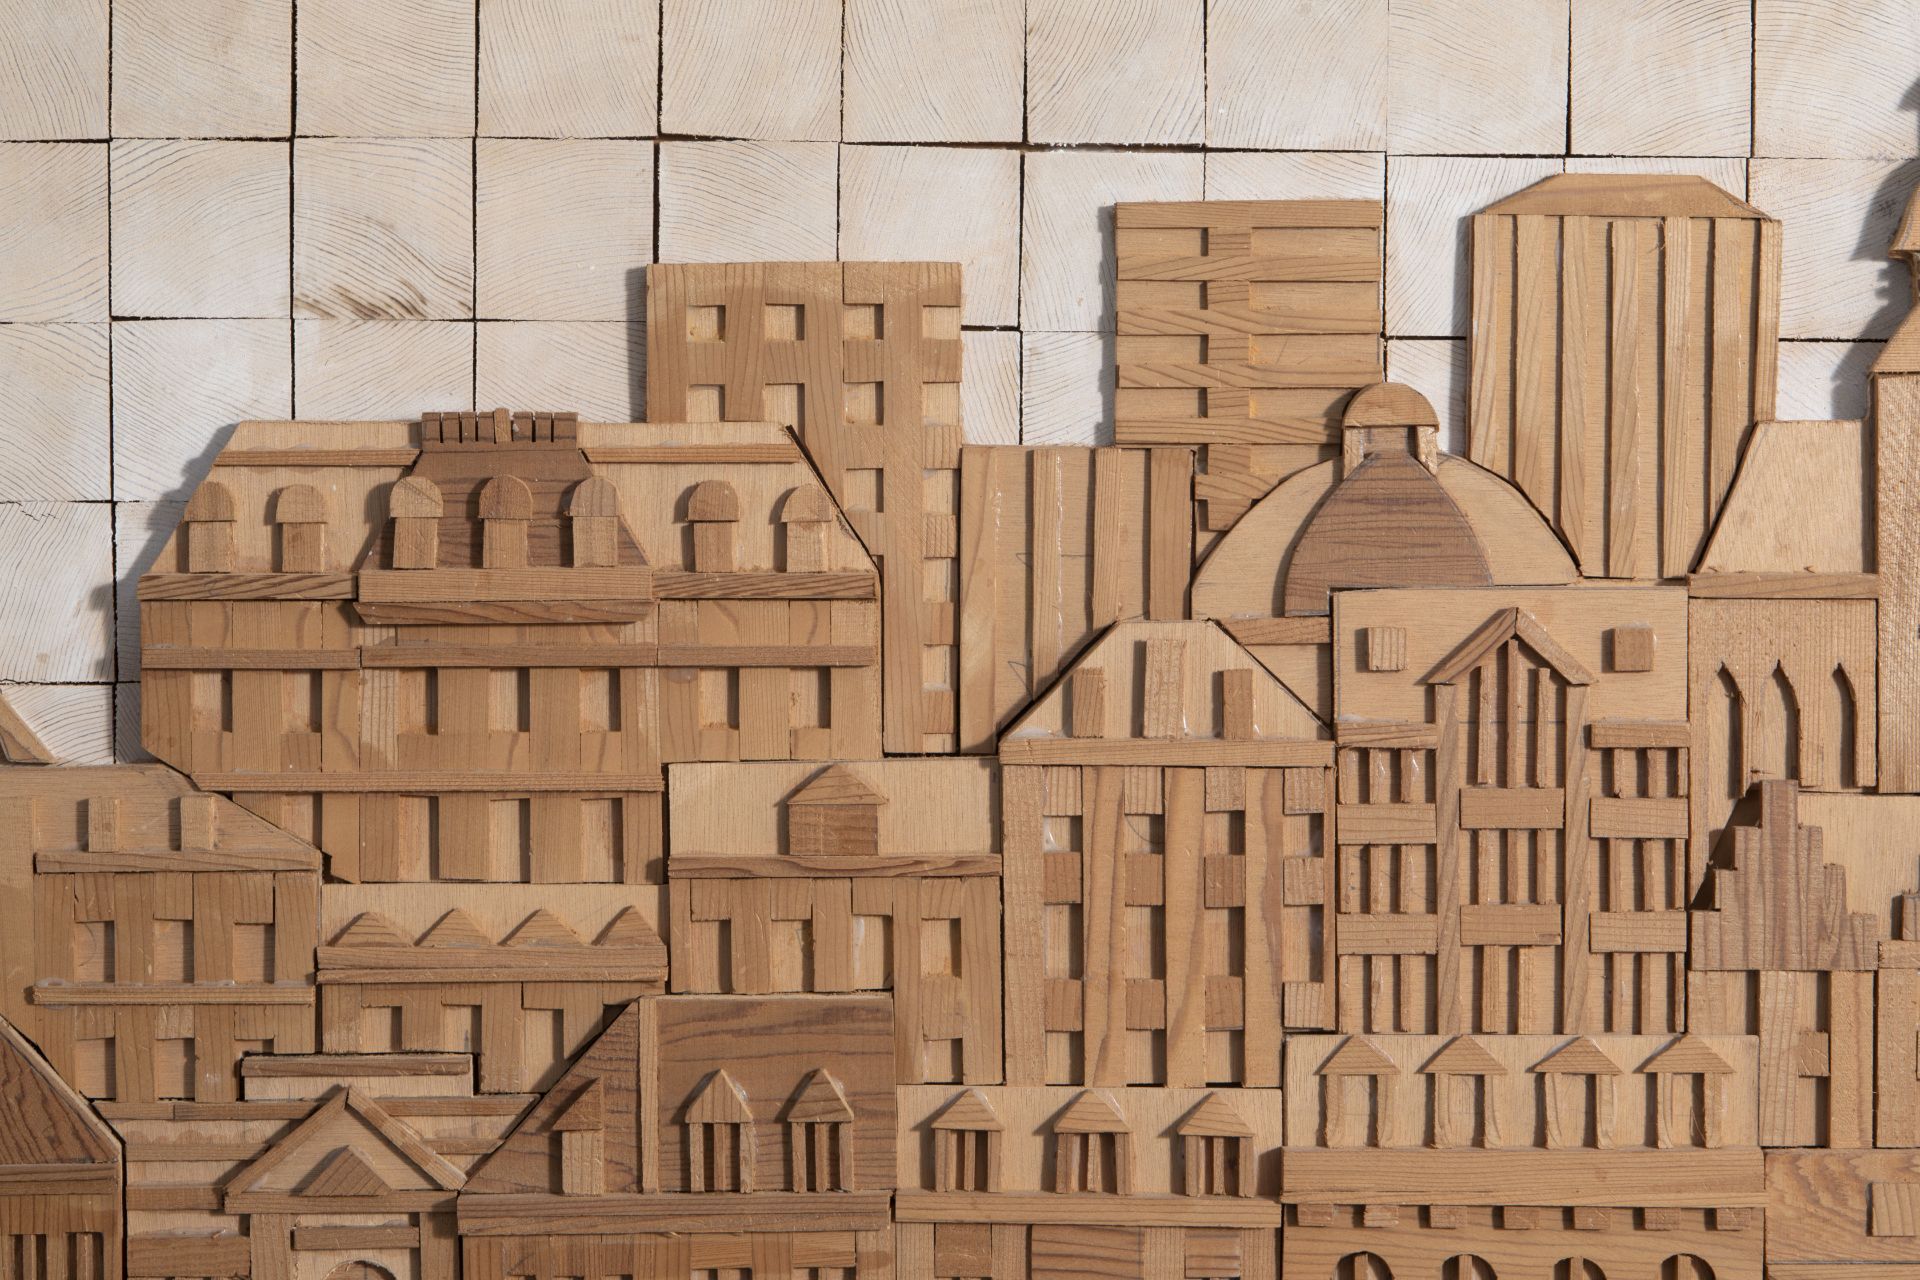 Yves Bosquet (1939): City life, polychrome painted wood sculpture, with accompanying monograph - Image 4 of 14